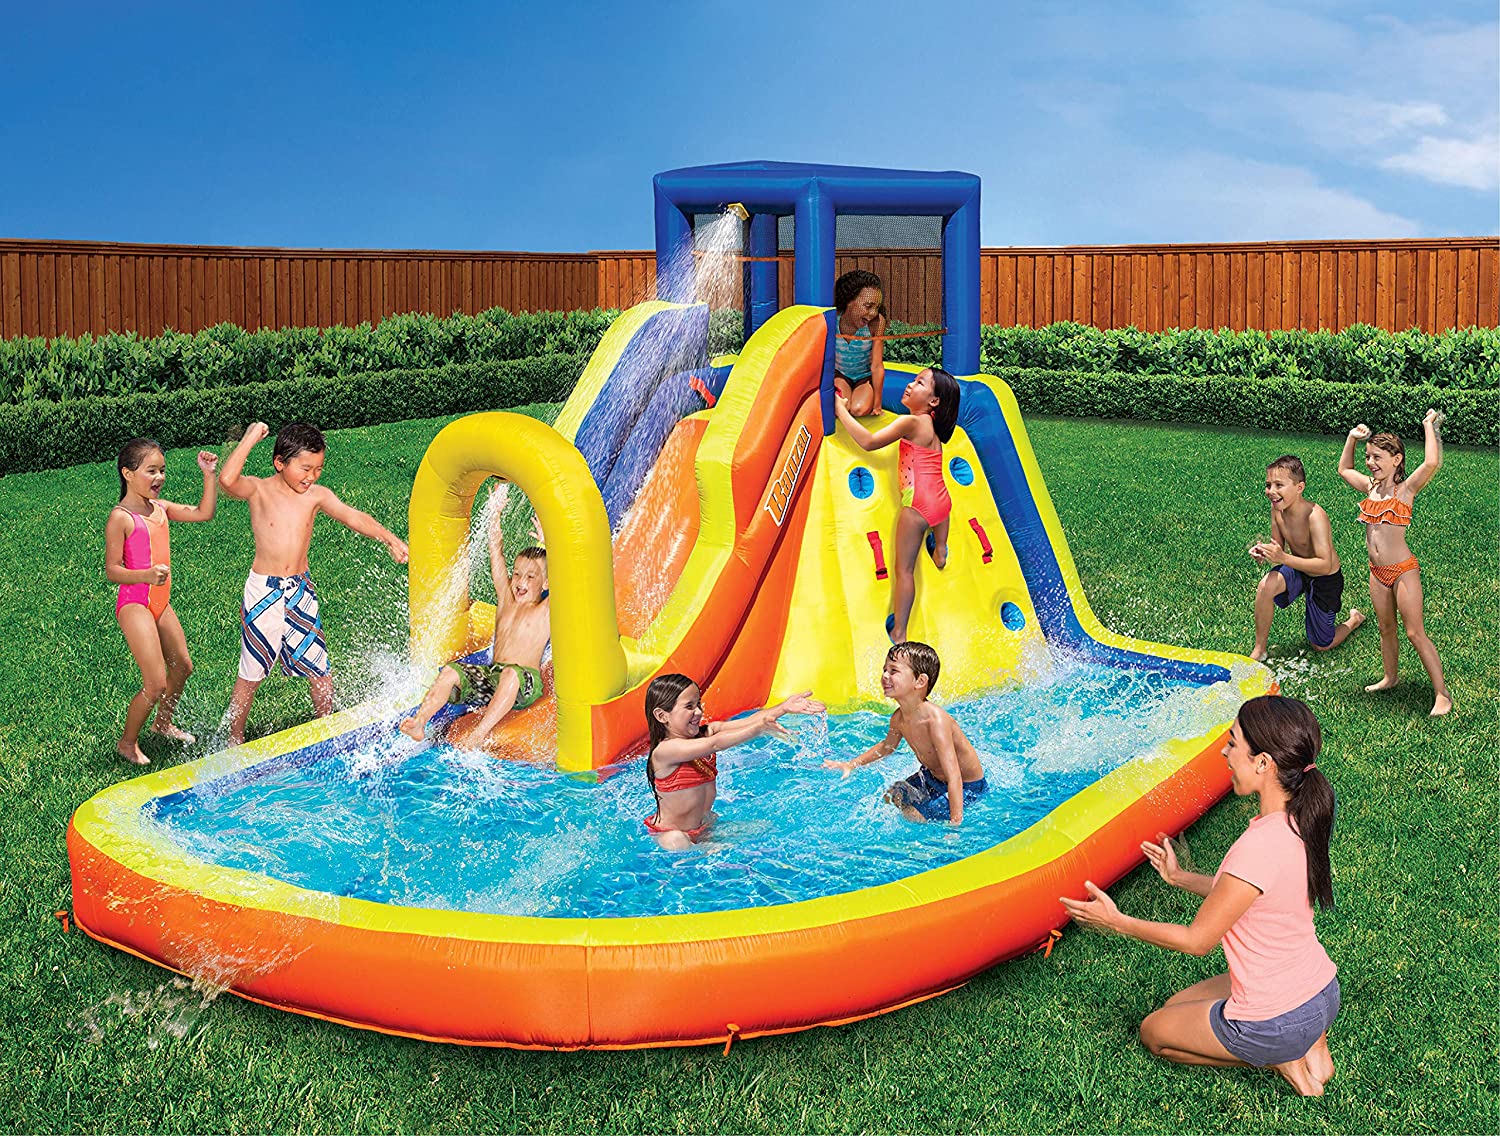 BANZAI Inflatable Water Slide & Bounce House (Combo Pack) - Huge Heavy Duty Outdoor Kids Adventure Park Pool with Sprinkler Wave and Slide Plus Large Bonus 12’x9 Bounce House - Free Blower Included - image 2 of 5